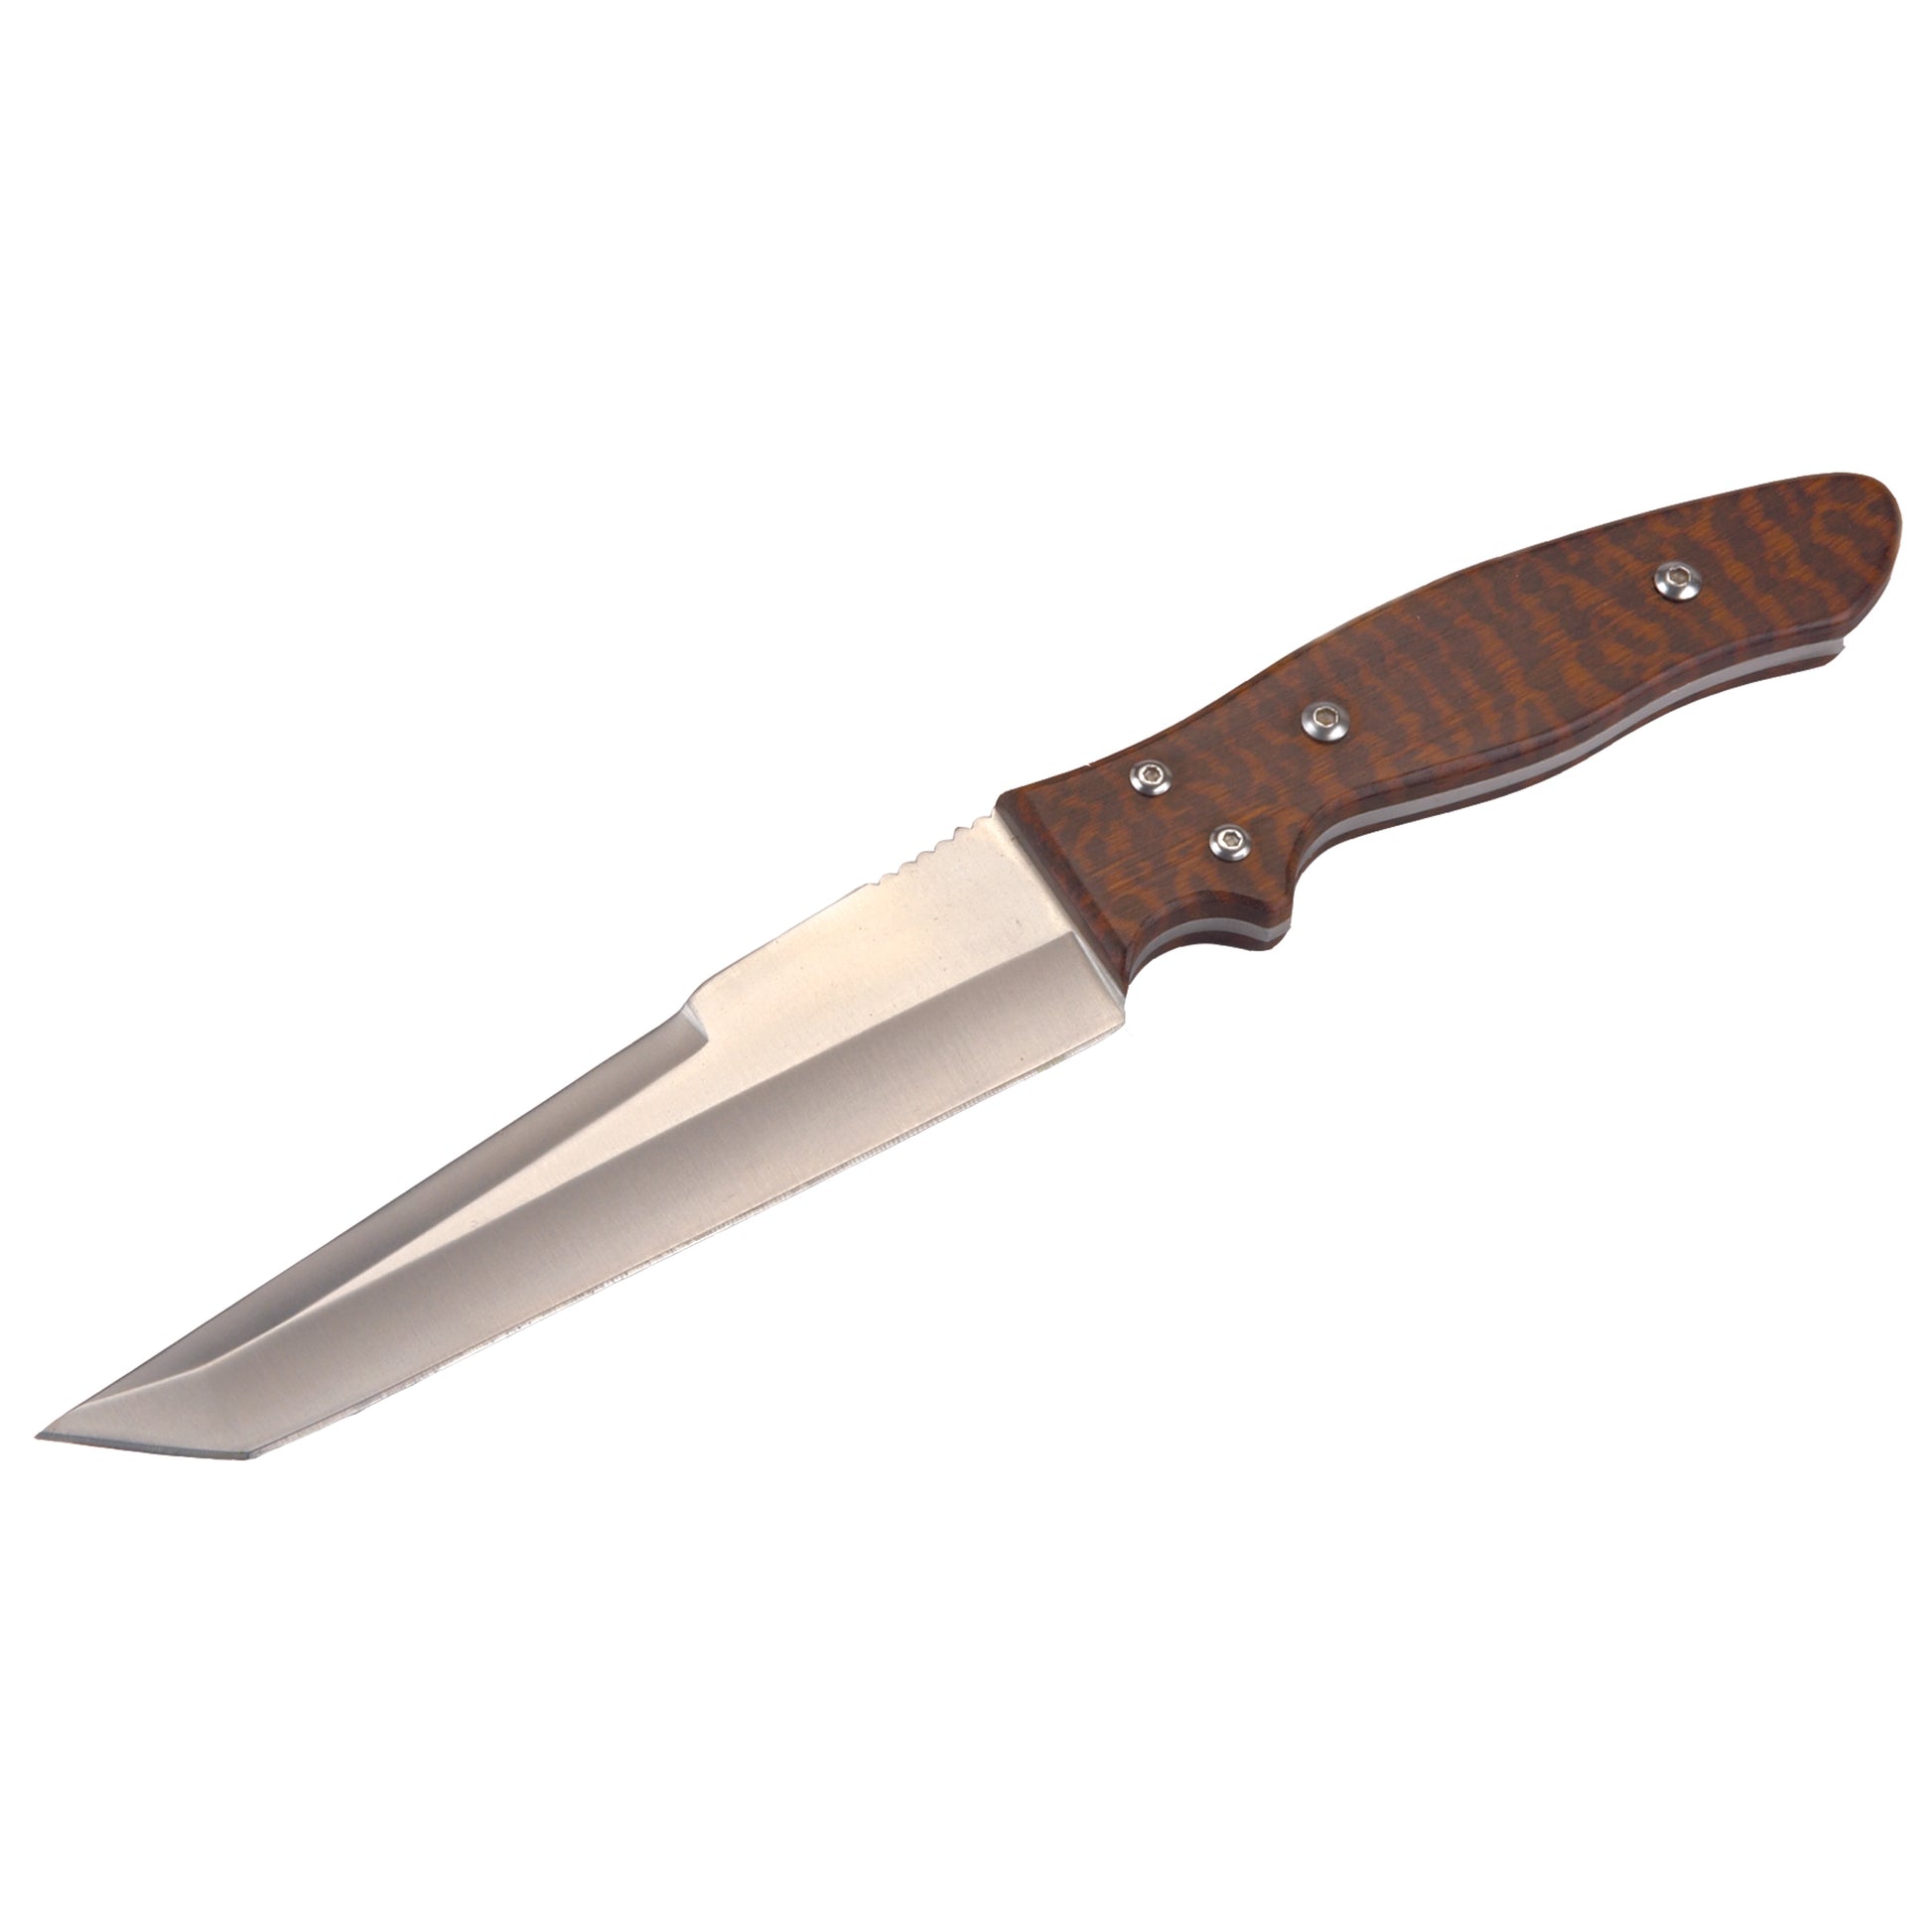 Handcrafted in the U.S.A., this classic American Case Fishing Knife is  about 4 1/4 inches long (folded/closed) and weighs approximately 2